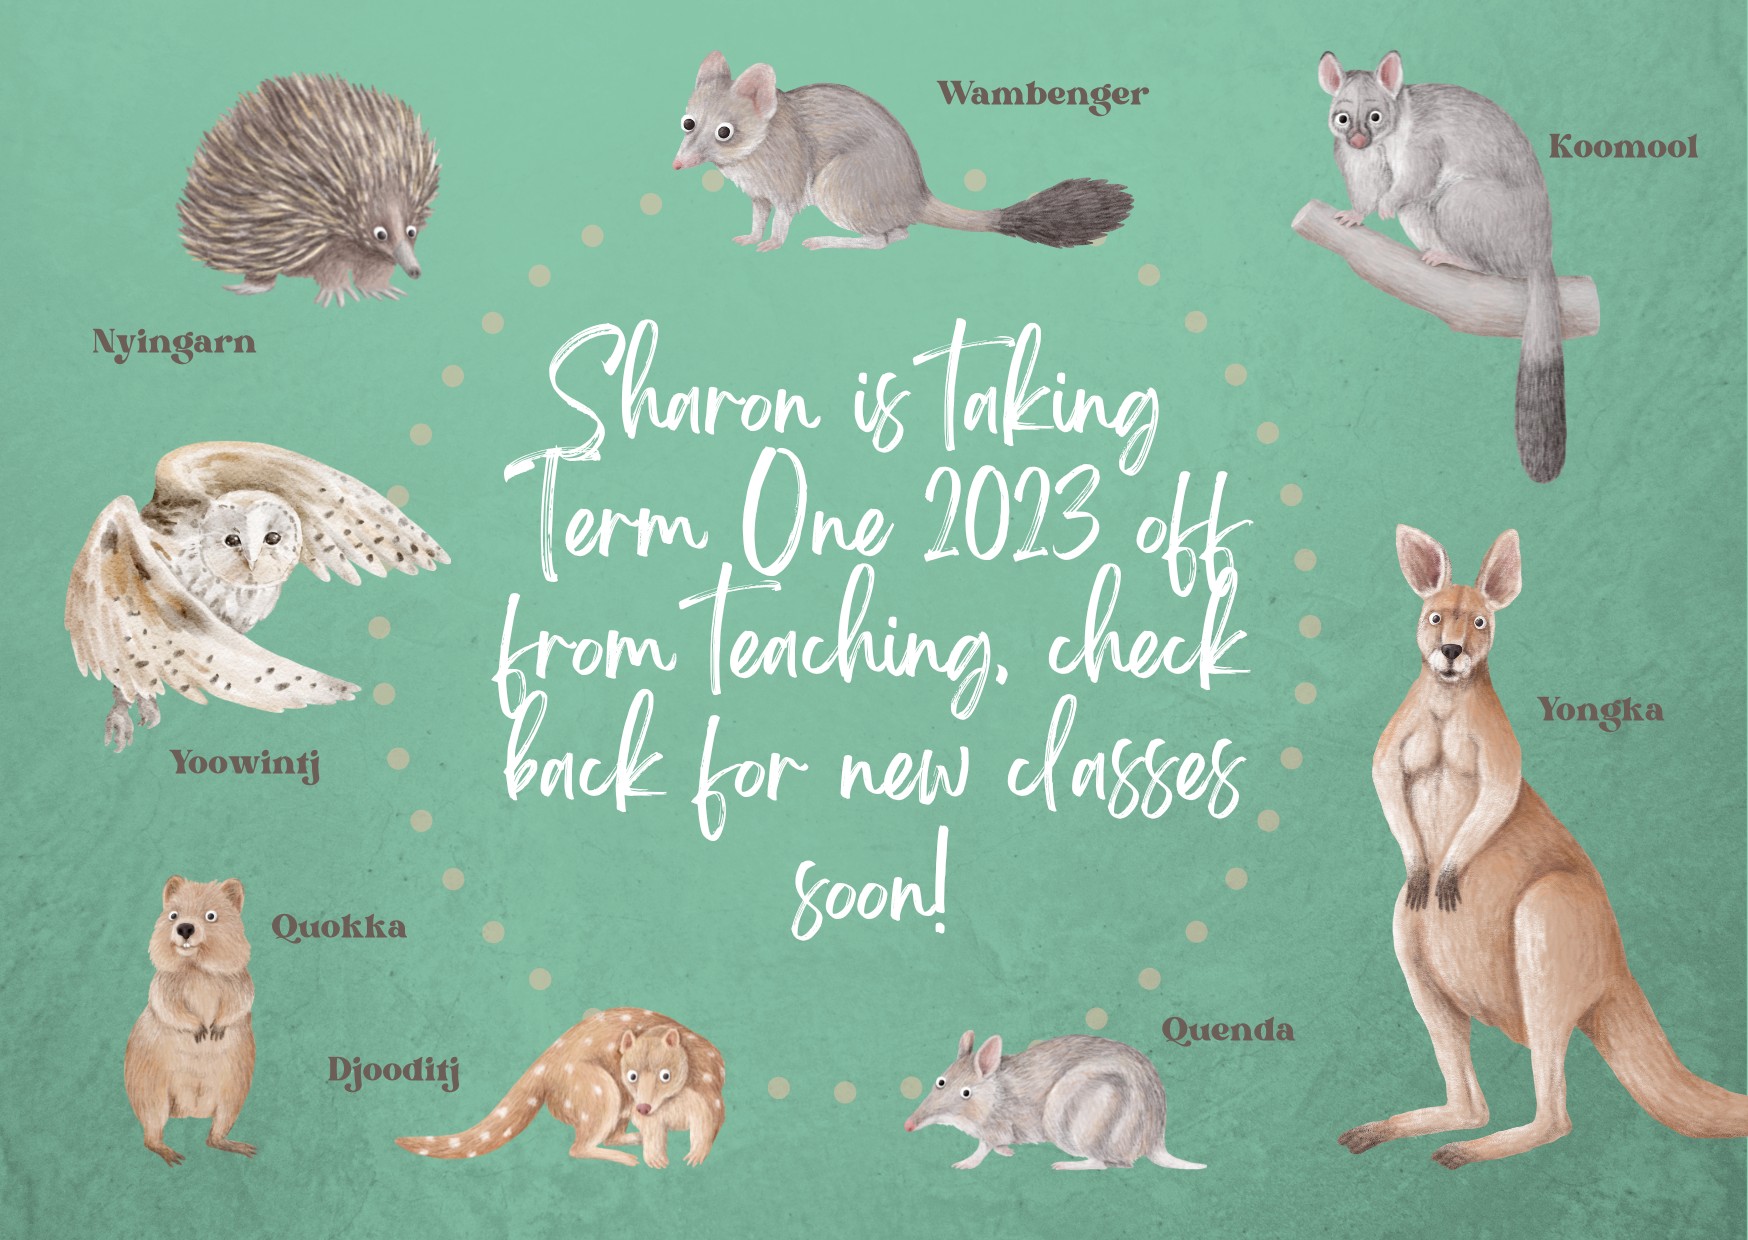 Postcard with text surrounded by native south west animals with their Noongar name typed beside them